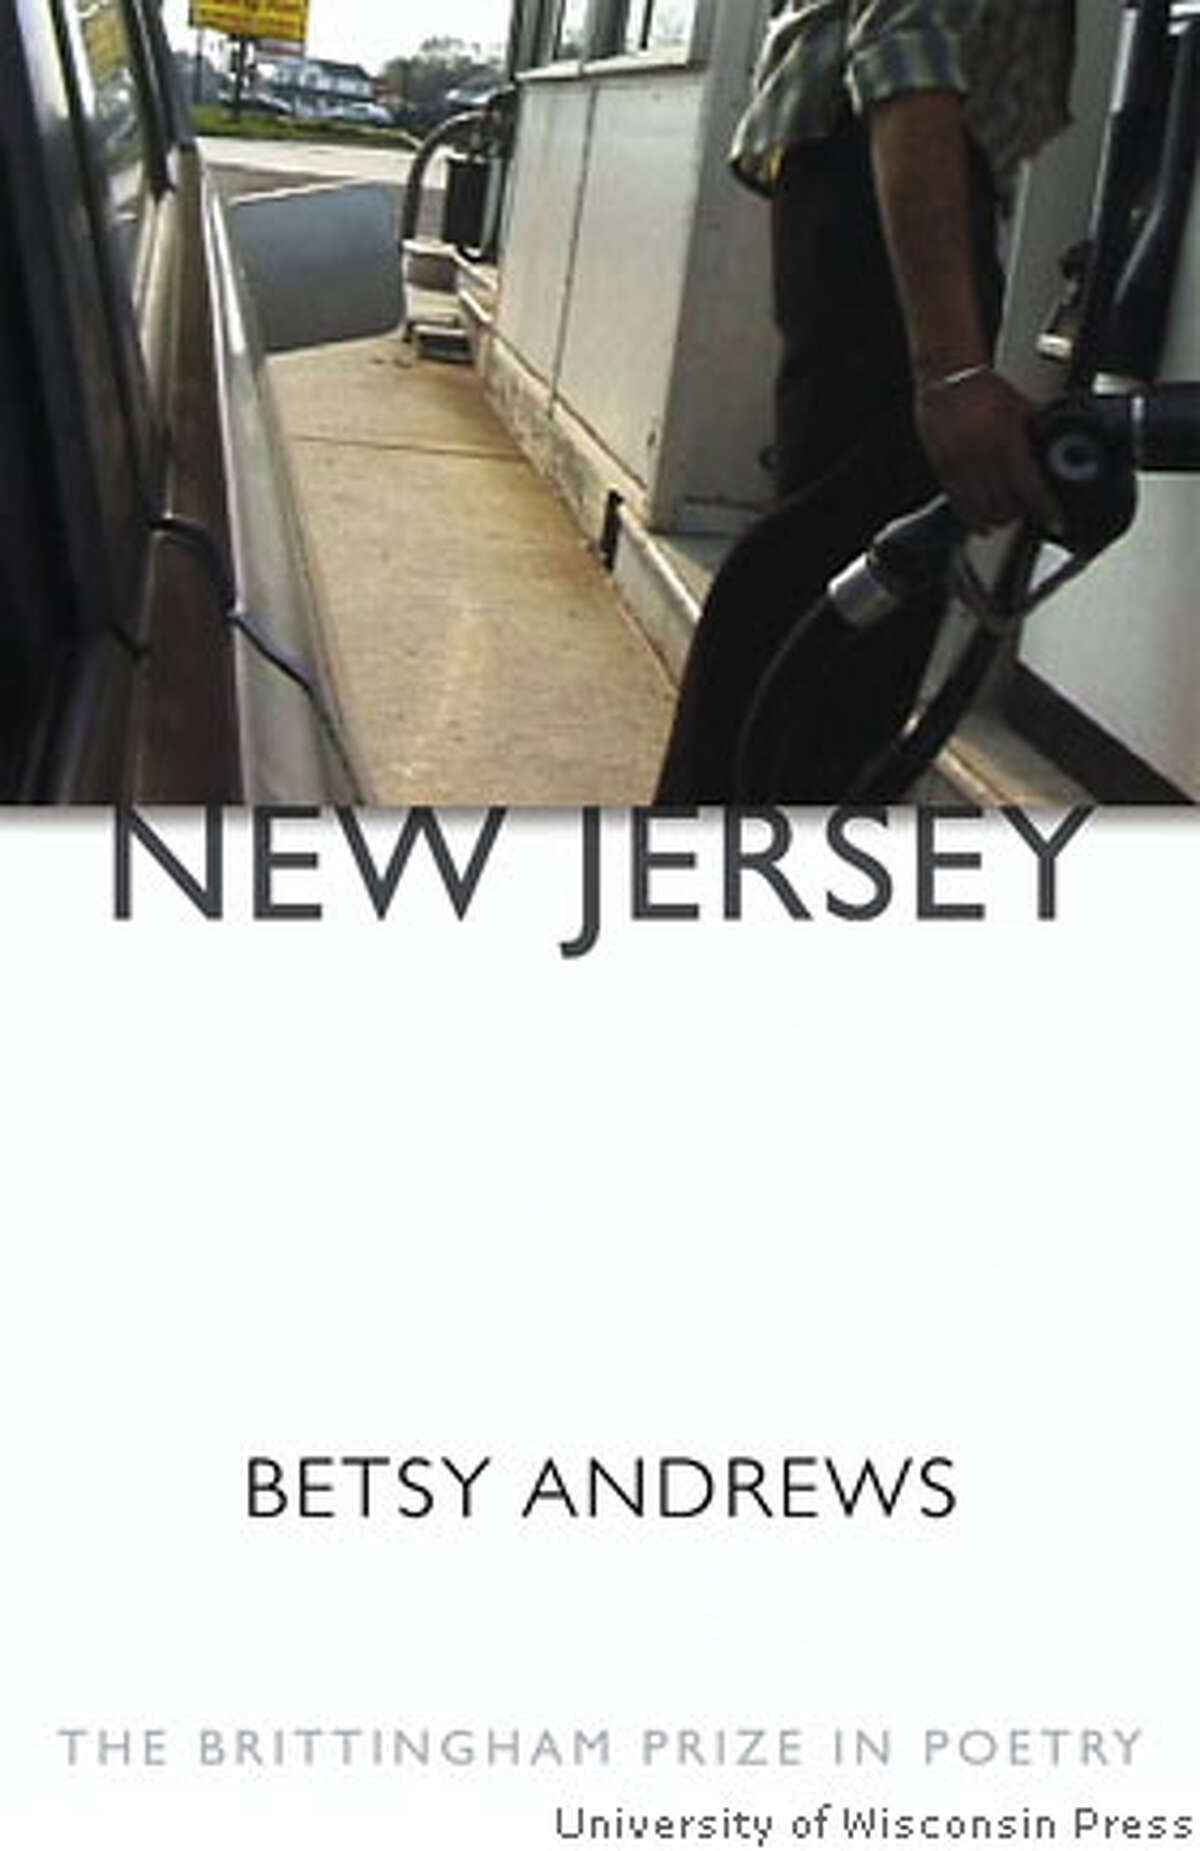 Book cover art for, "New Jersey" by Betsy Andrews.